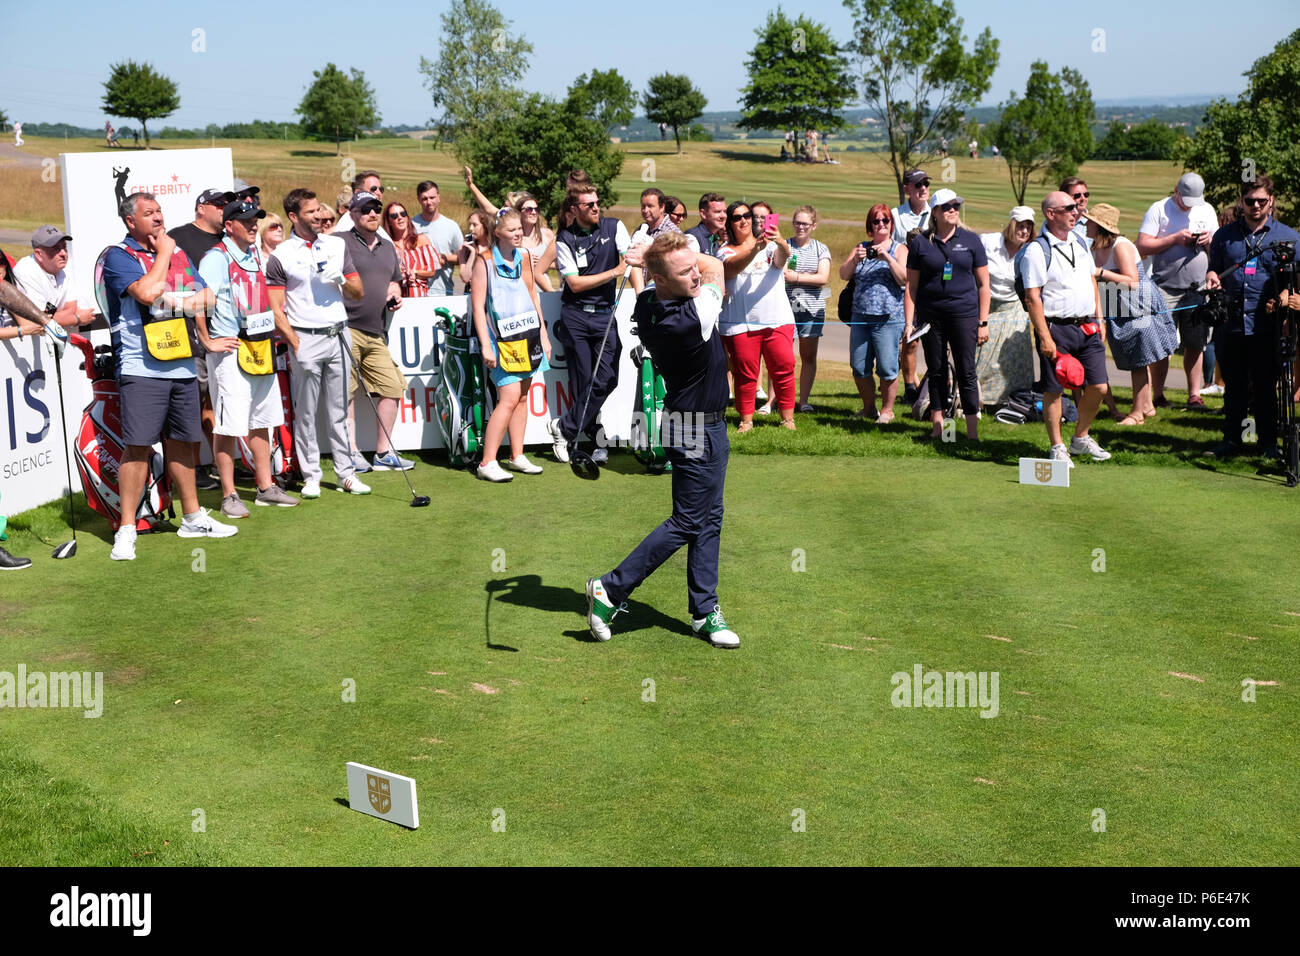 Celebrity Cup golf Celtic Manor, Newport, Wales, June 2018 - Singer Ronan Keating tees off at the sixth hole watched by a large crowd off spectators - Photo Steven May / Alamy Live News Stock Photo